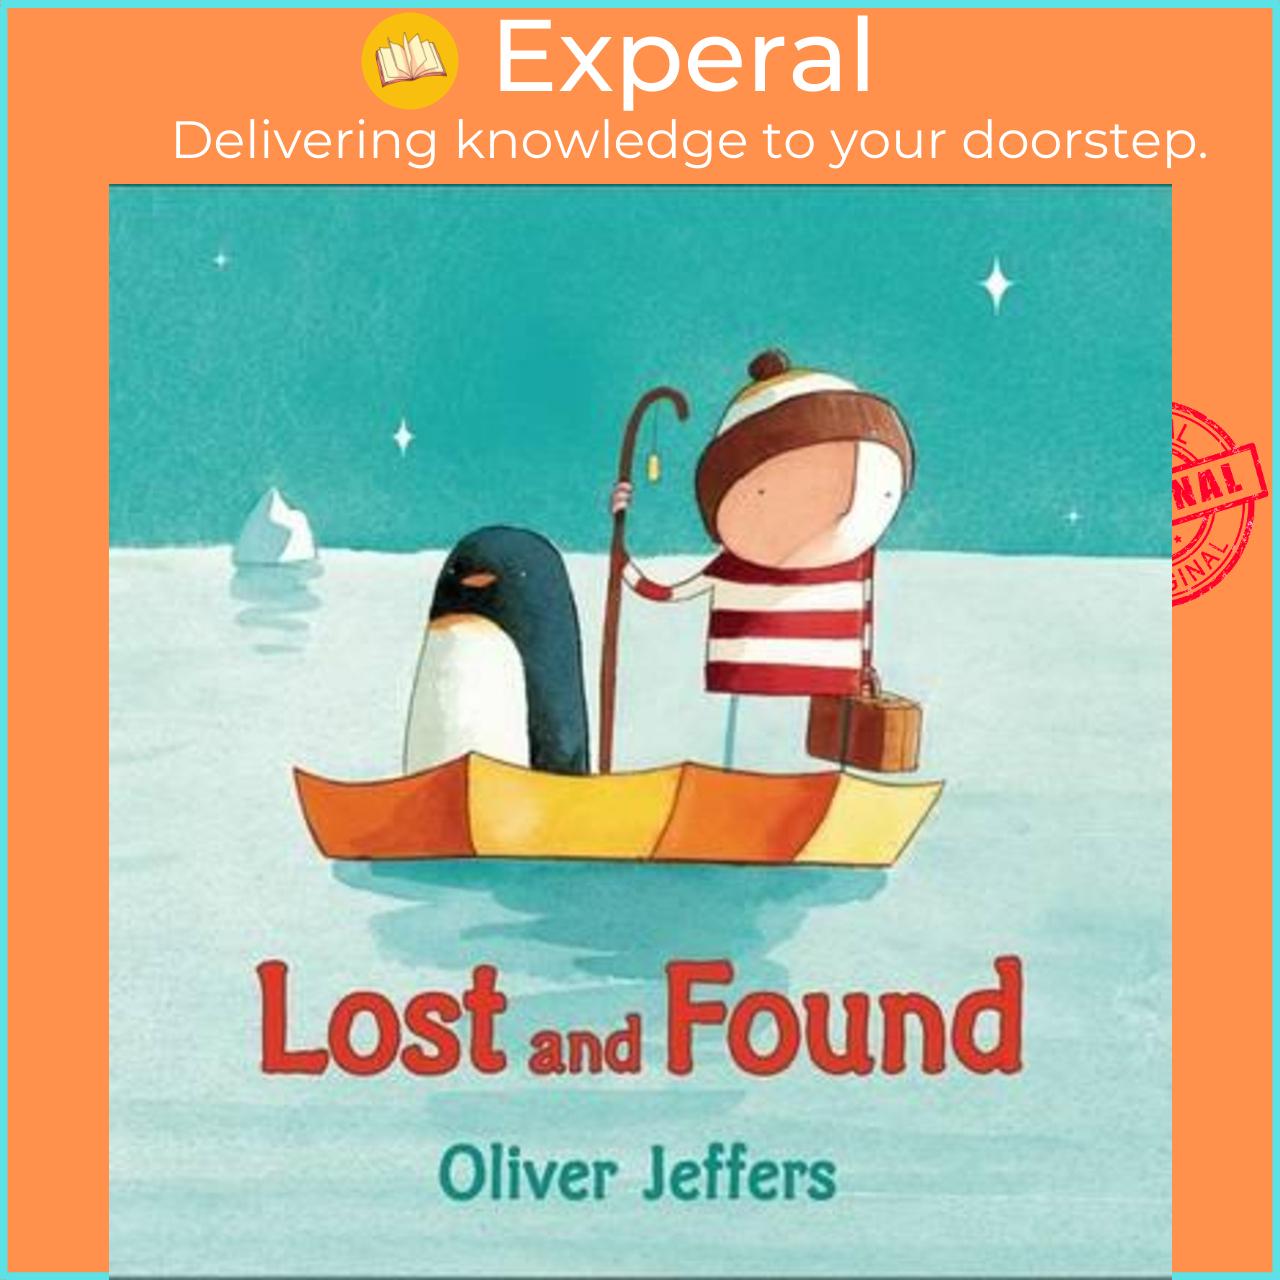 Sách - Lost and Found by Oliver Jeffers (US edition, hardcover)